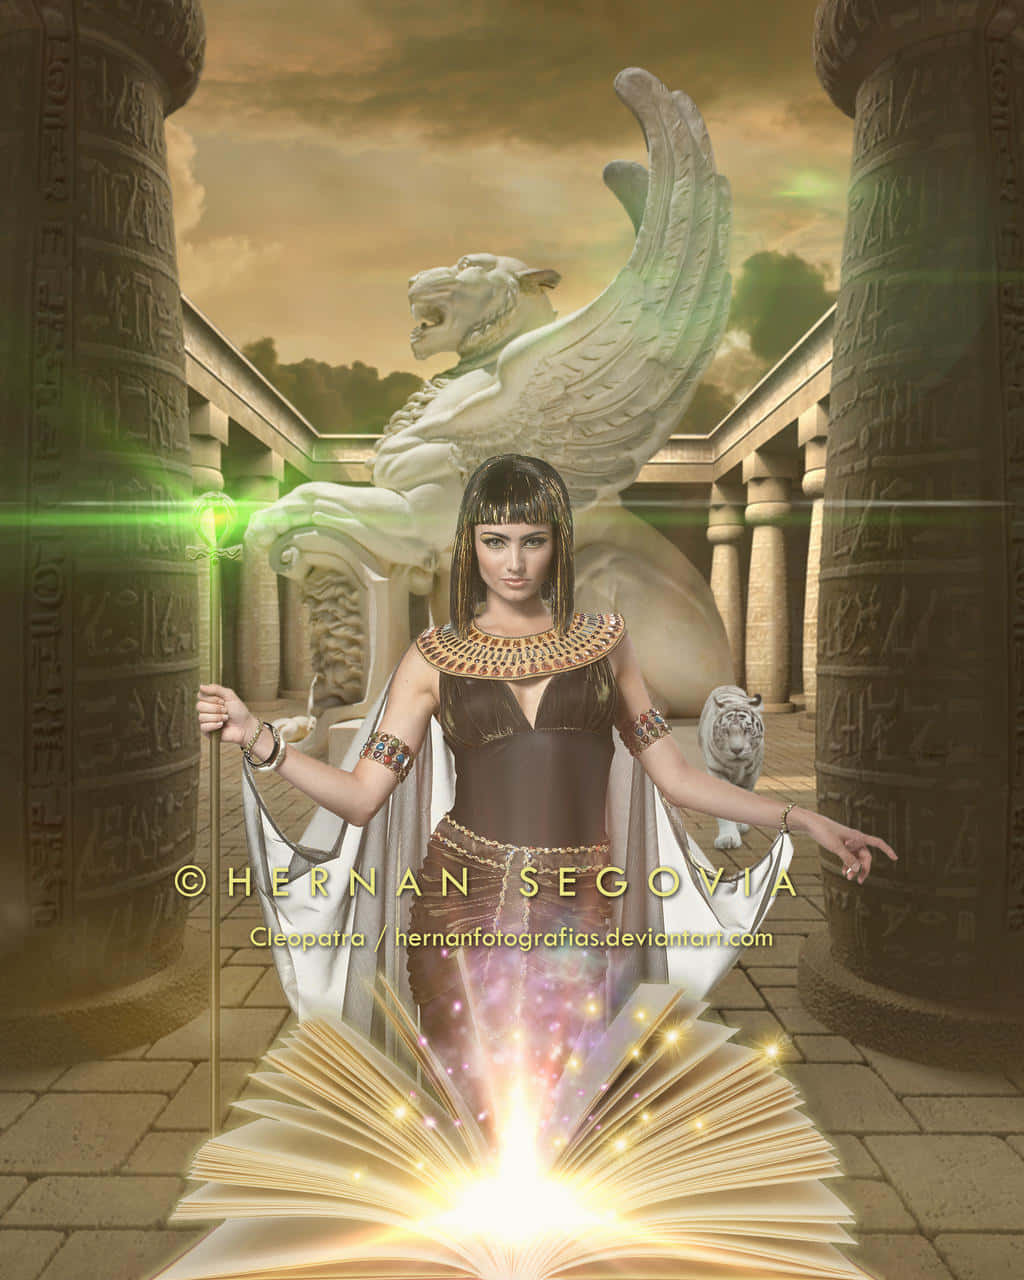 The famous Queen of Egypt, Cleopatra